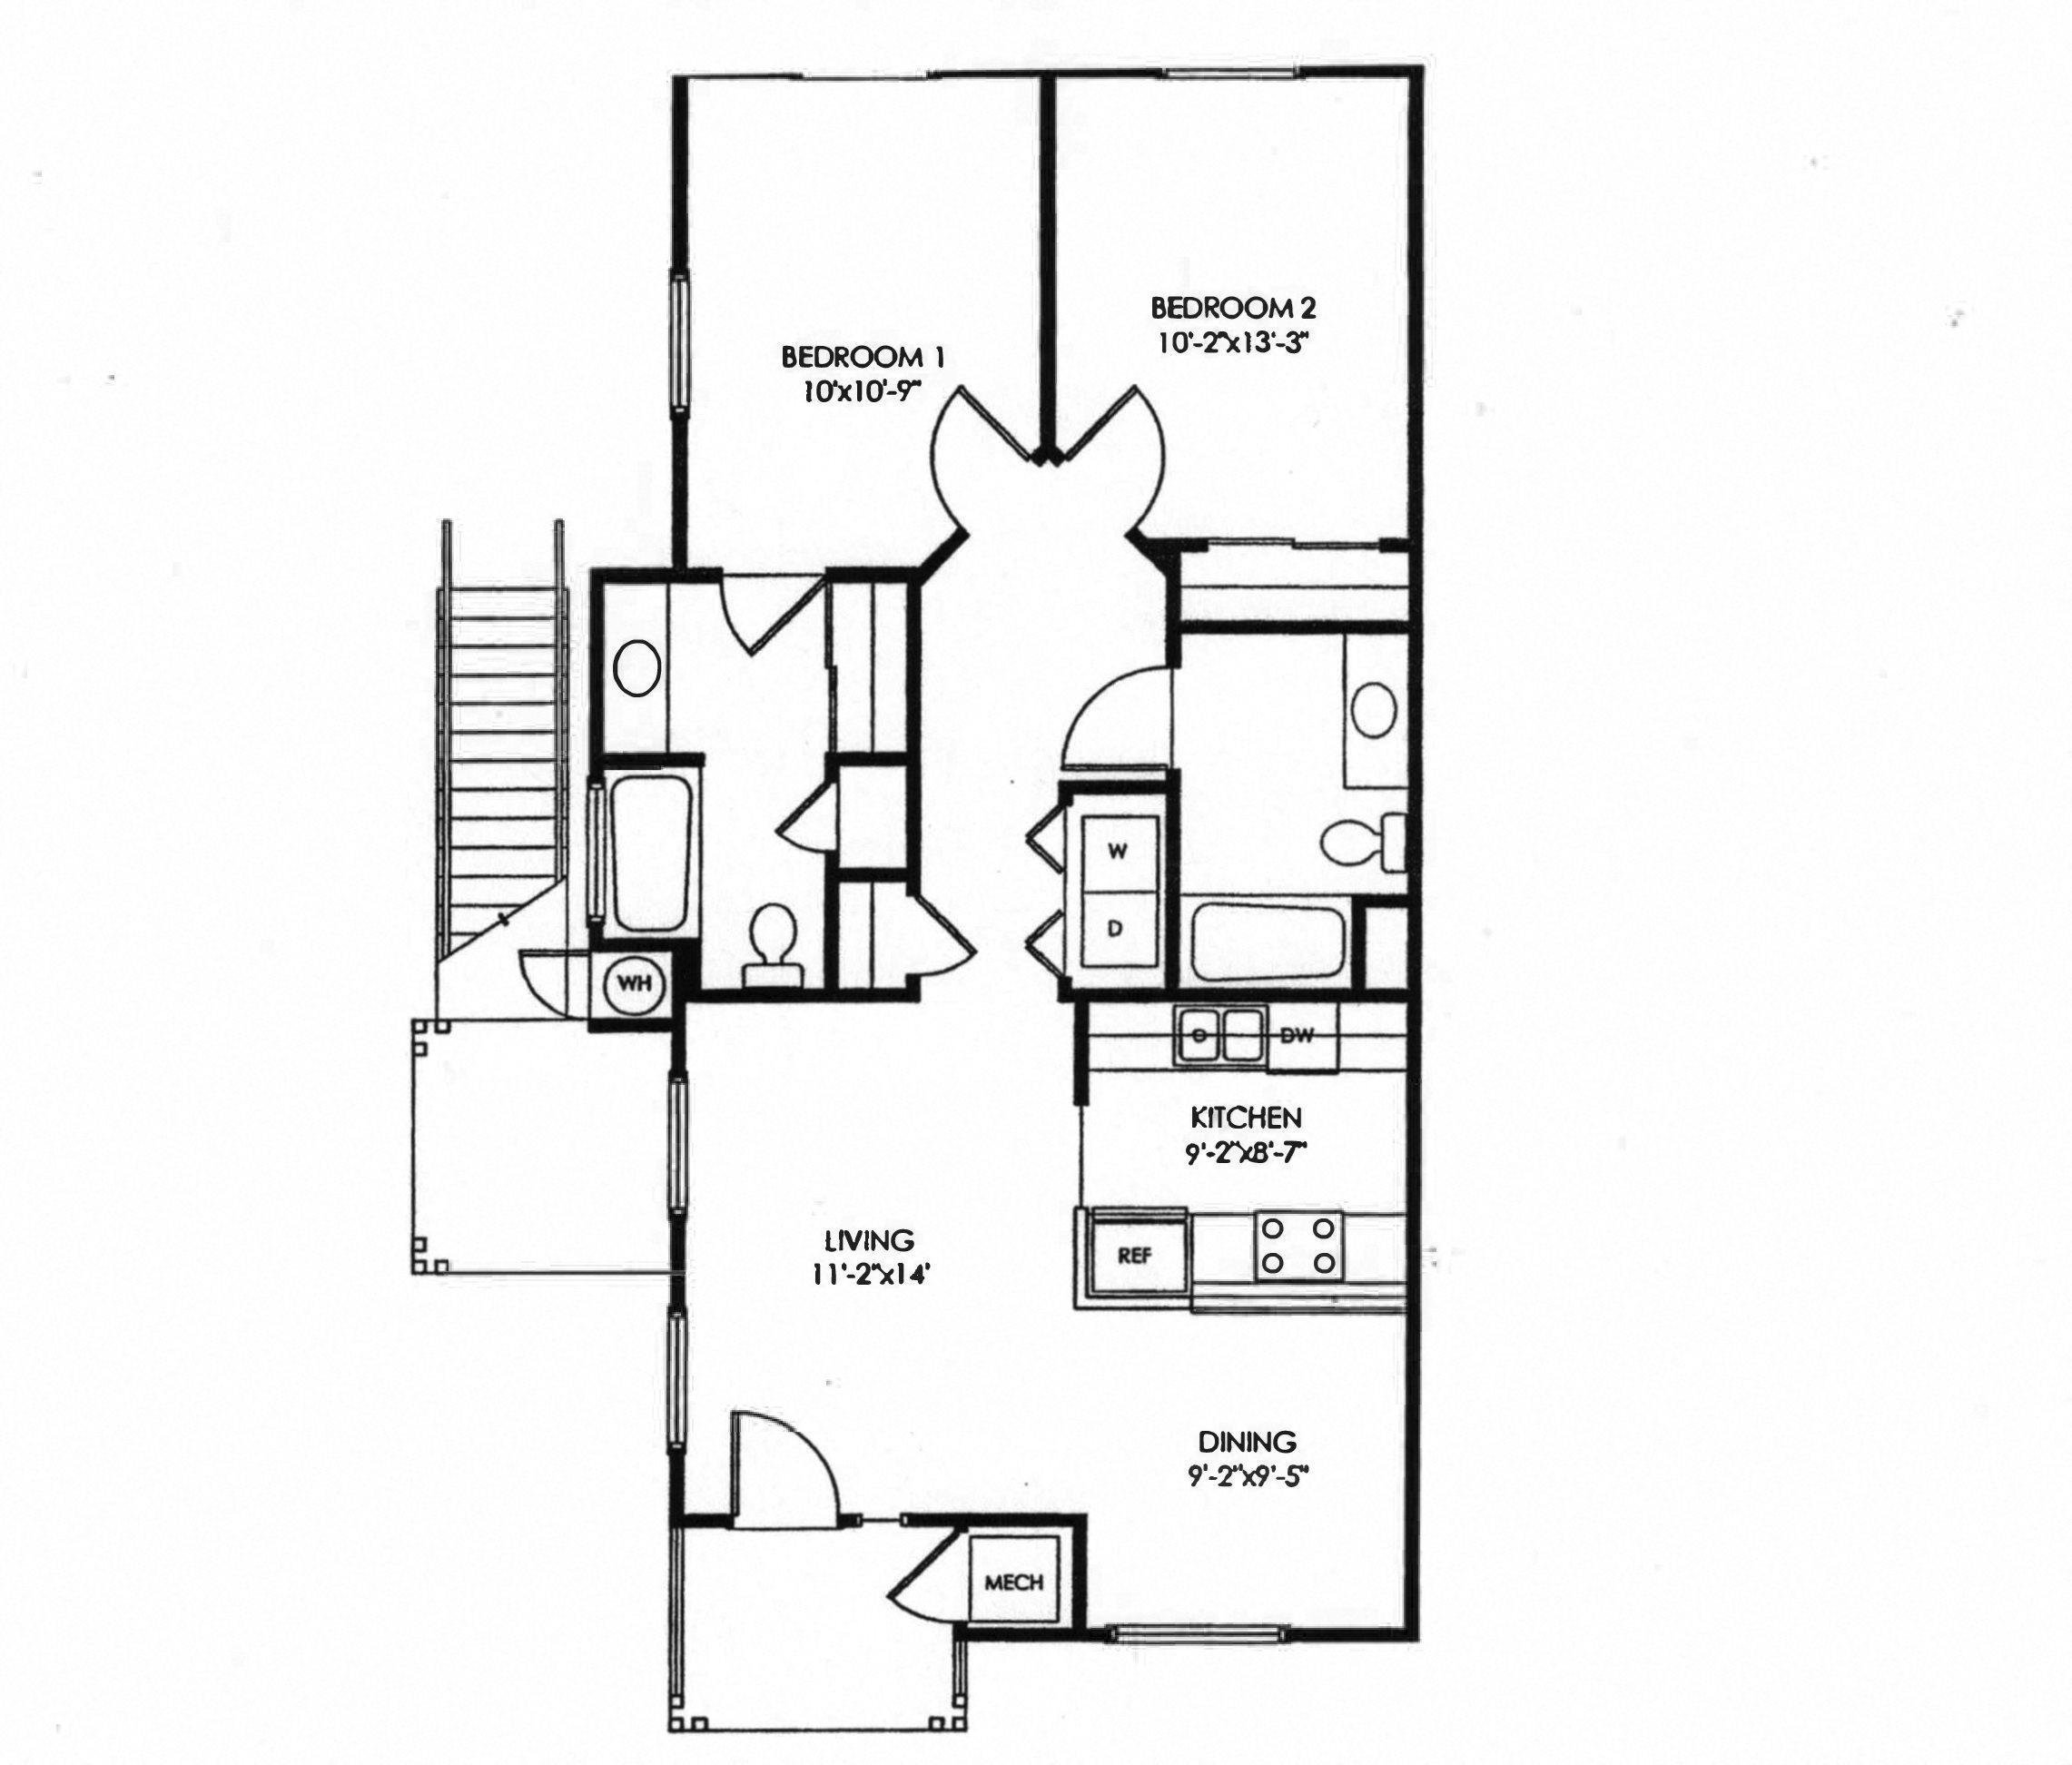 Floor Plans Of Lincoln Gardens Apartments In Napa Ca